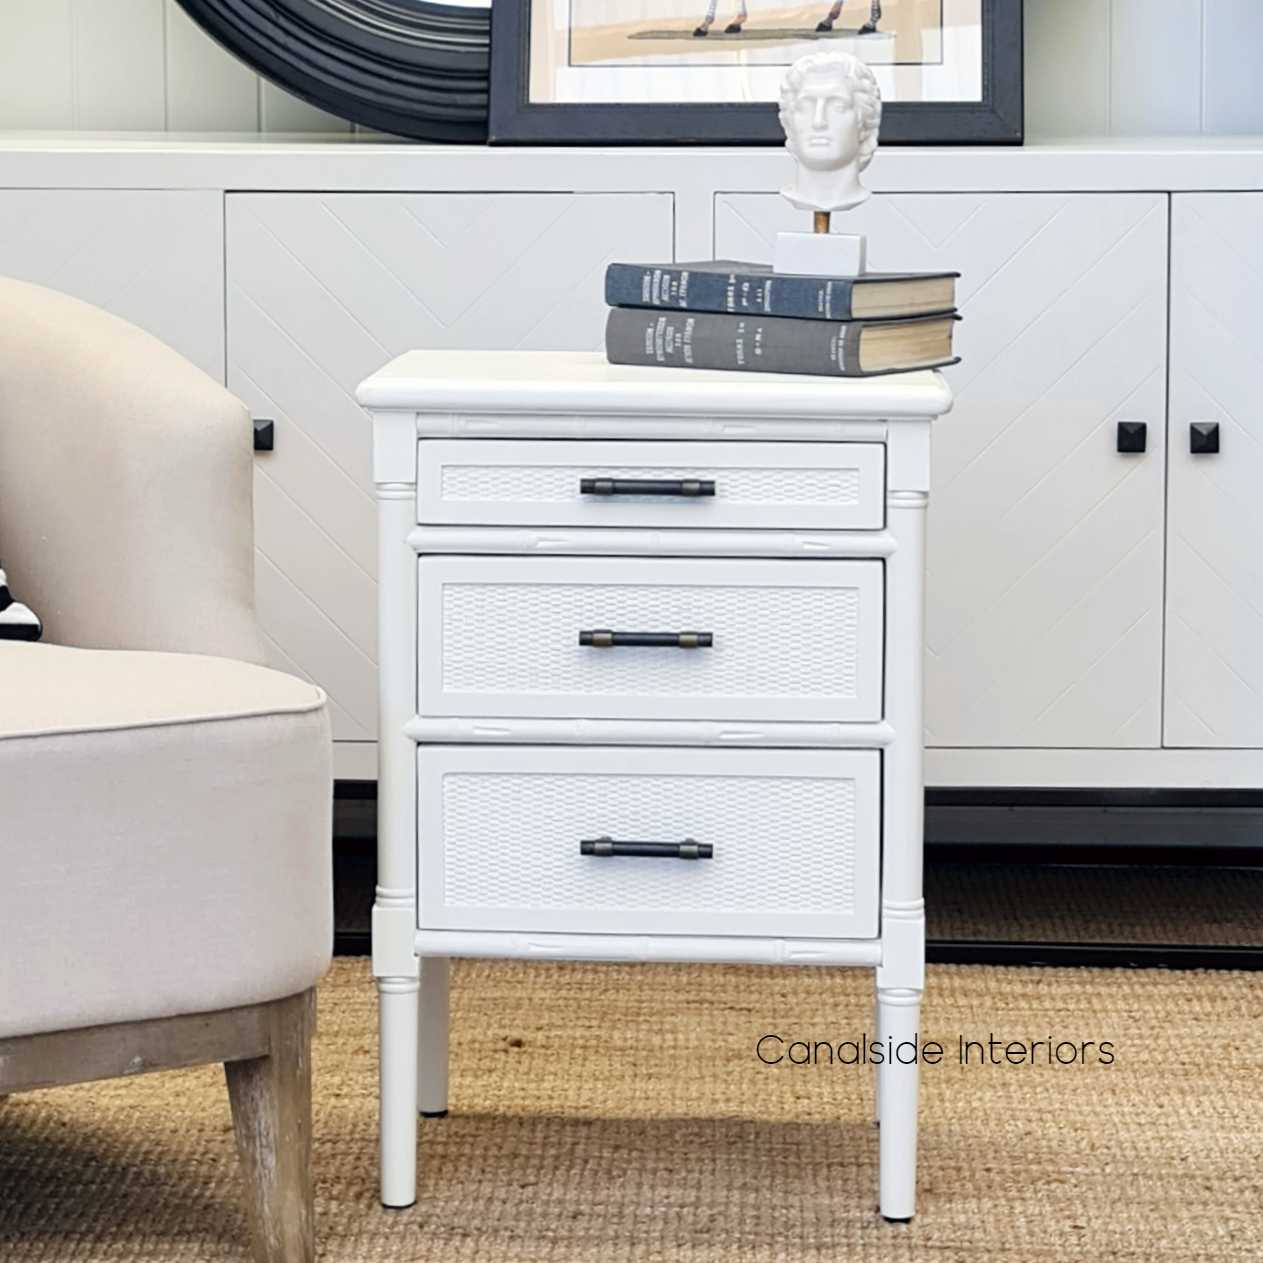 Brielle Rattan Bedside table storage drawers HAMPTONS Style, PLANTATION Style, LIVING Room, STORAGE, STORAGE bedroom chest  PLANTATION STYLE  Colonial island coastal Distressed White  BEDROOM, BEDROOM furniture nightstand side table sidetable bedsides